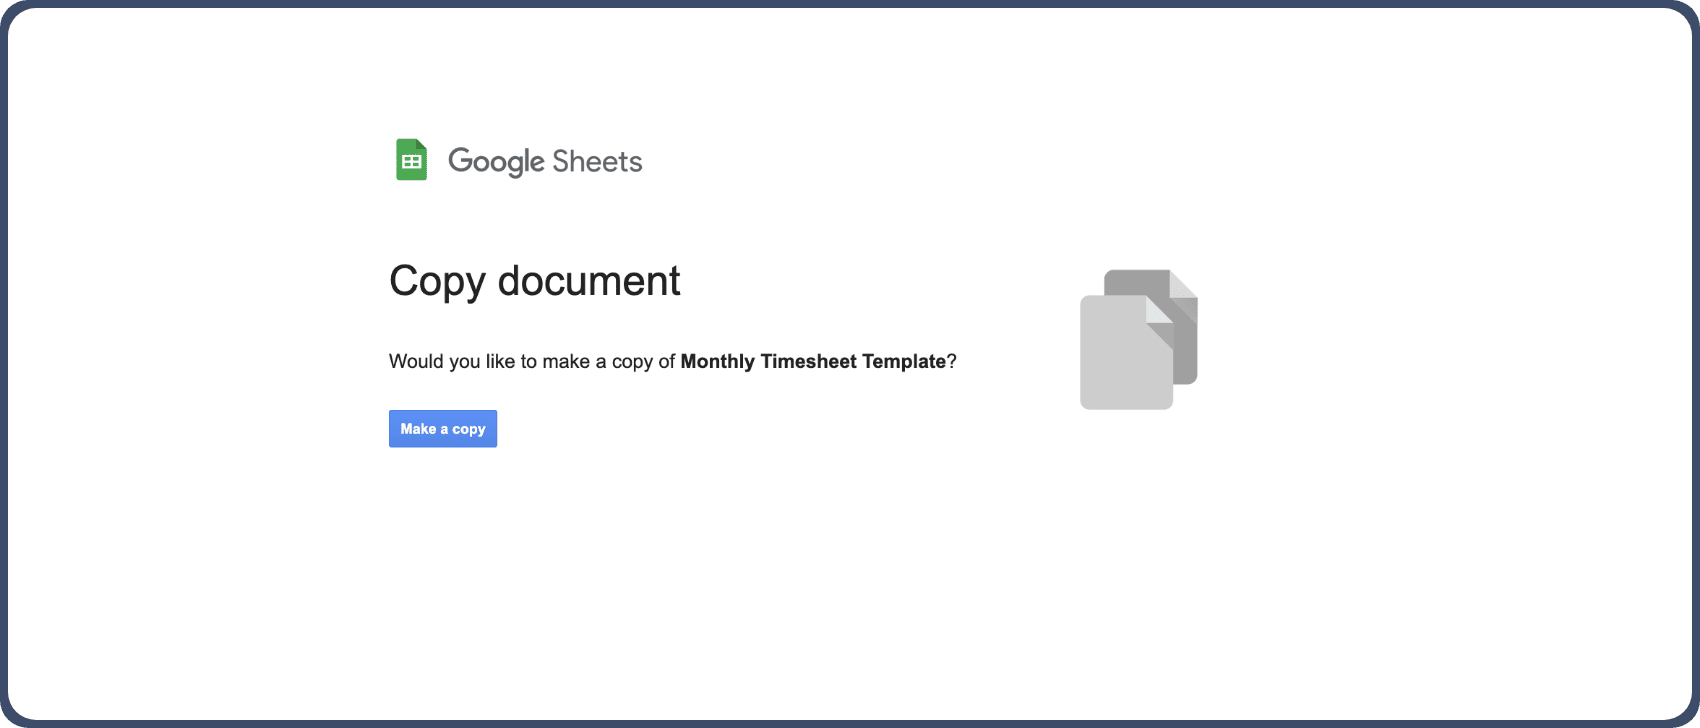 Google Sheets prompt, showing the Copy document option